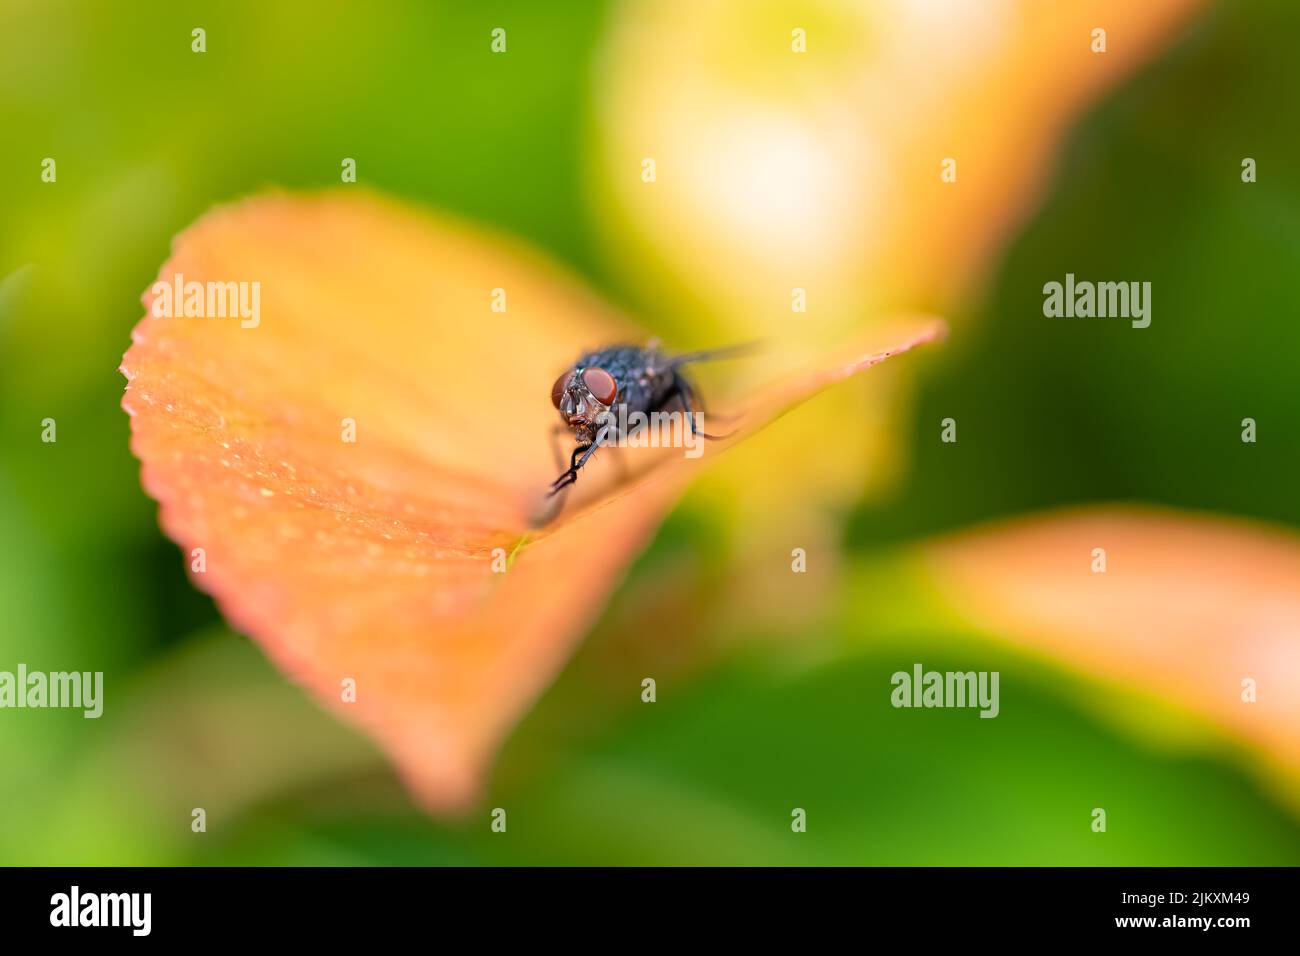 A fly standing on a leaf in the garden Stock Photo